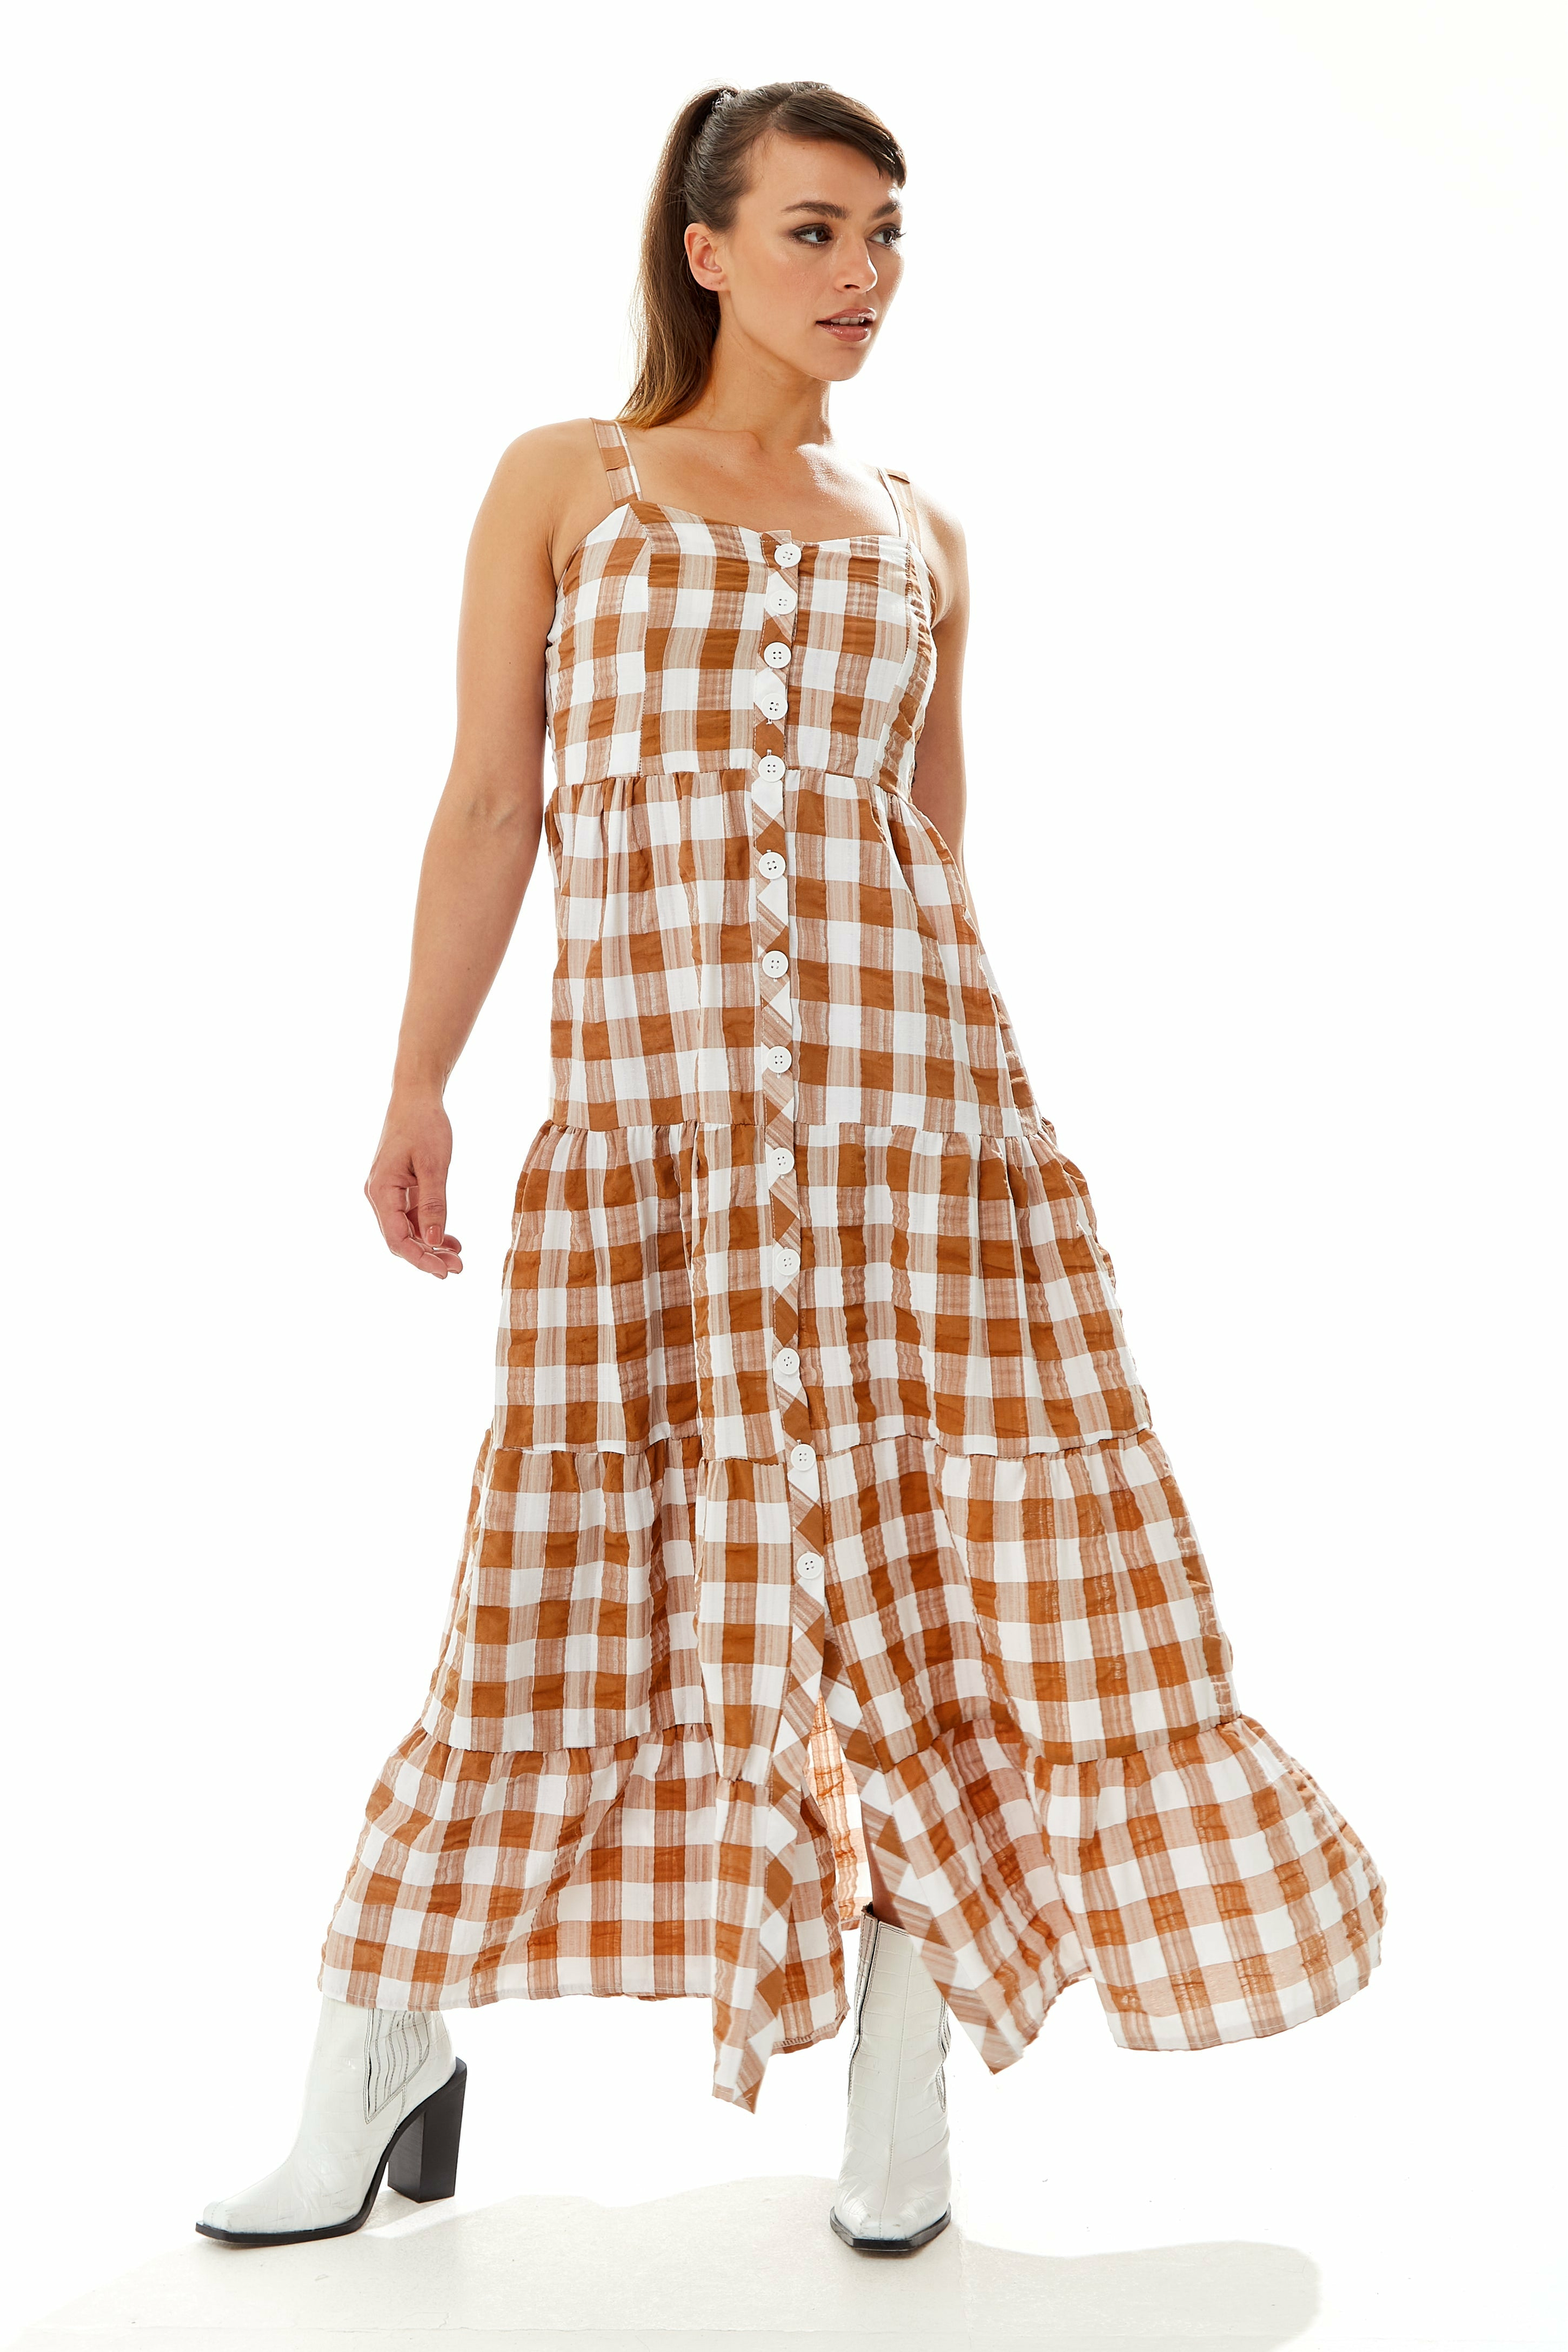 Gingham Print Maxi Dress In Brown And White TRSS22005